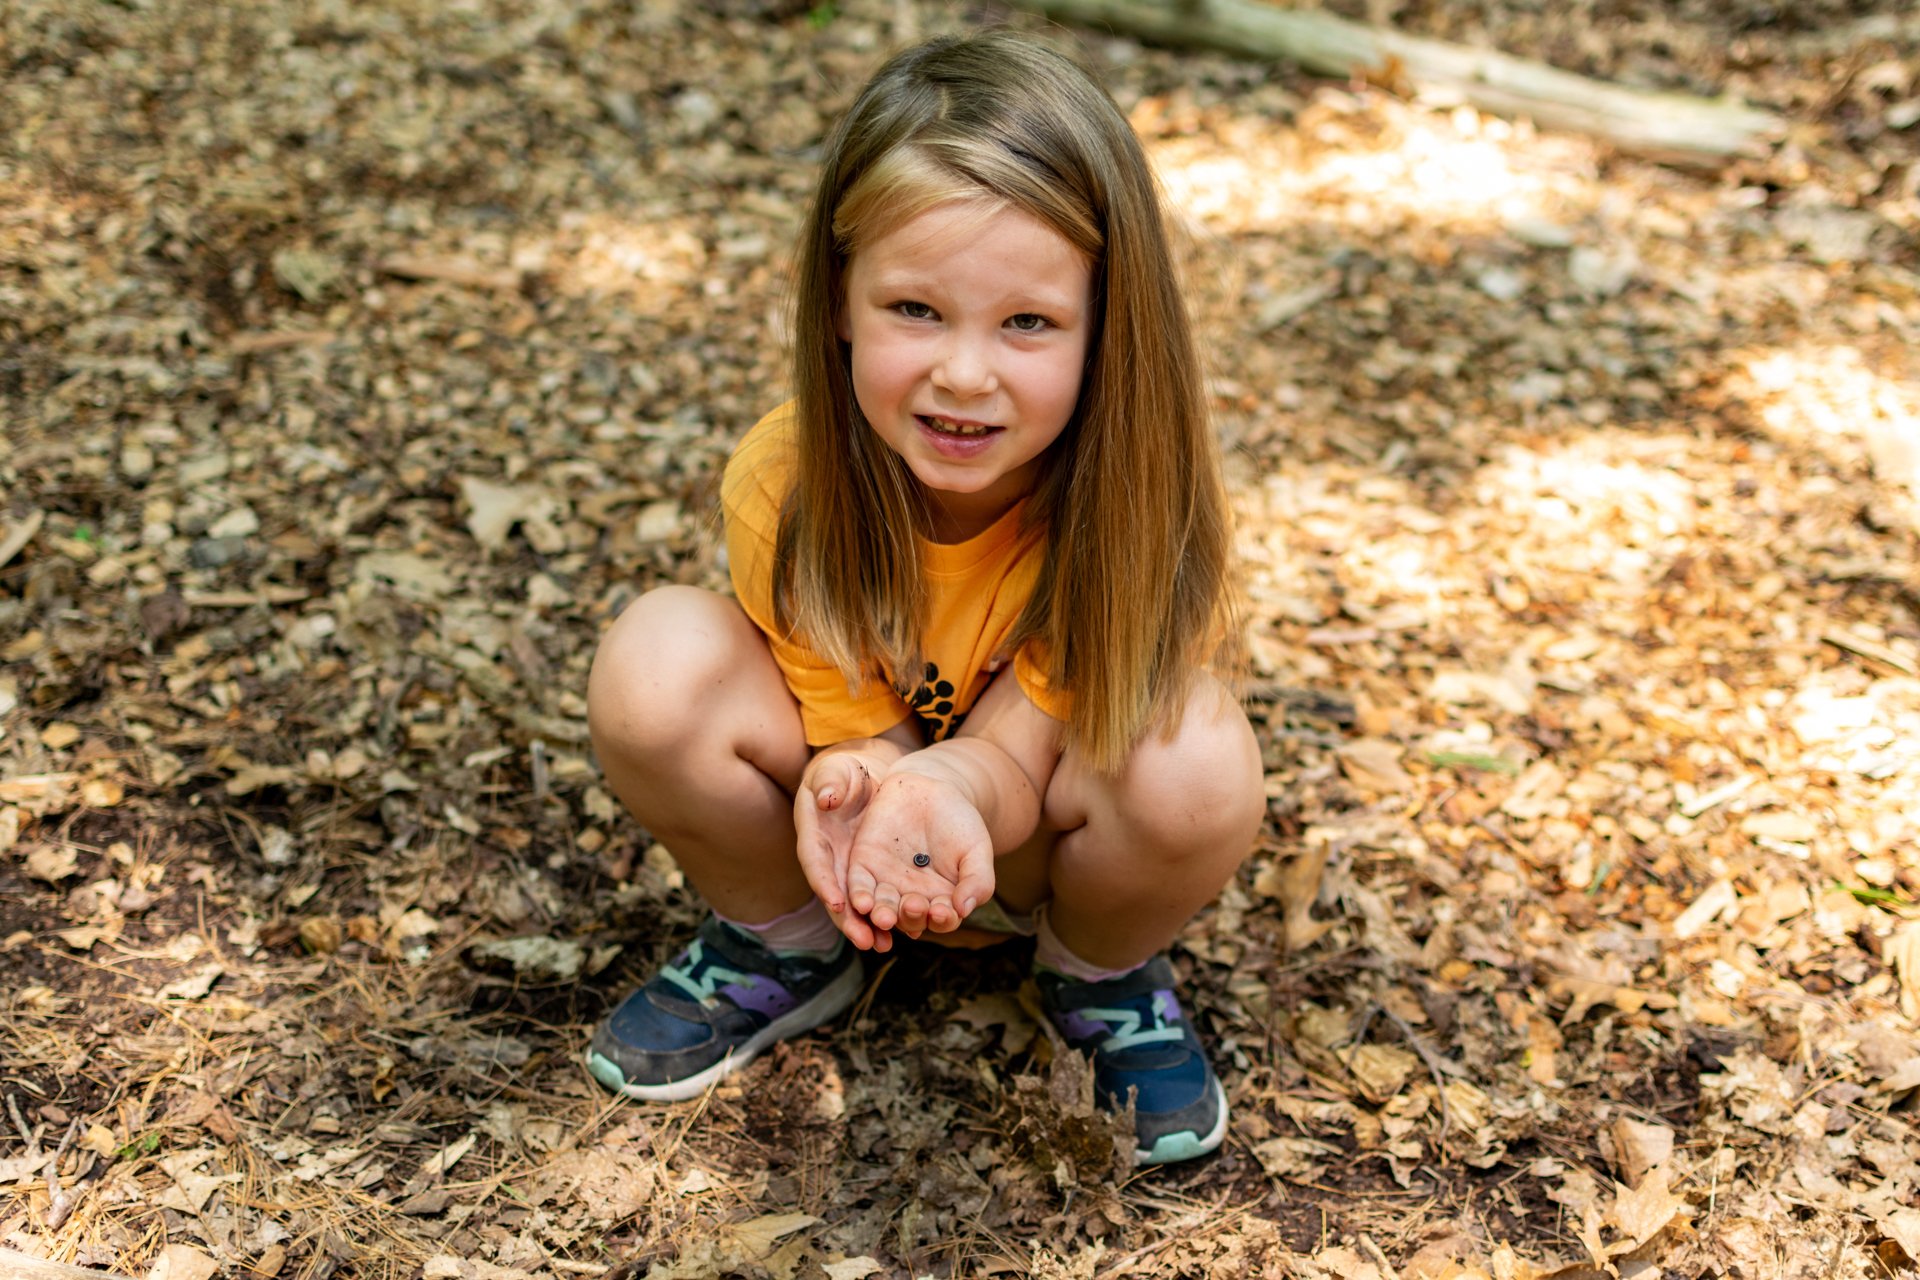 A camper at Habitat Nature Camp crouching and holding an insect in her hands